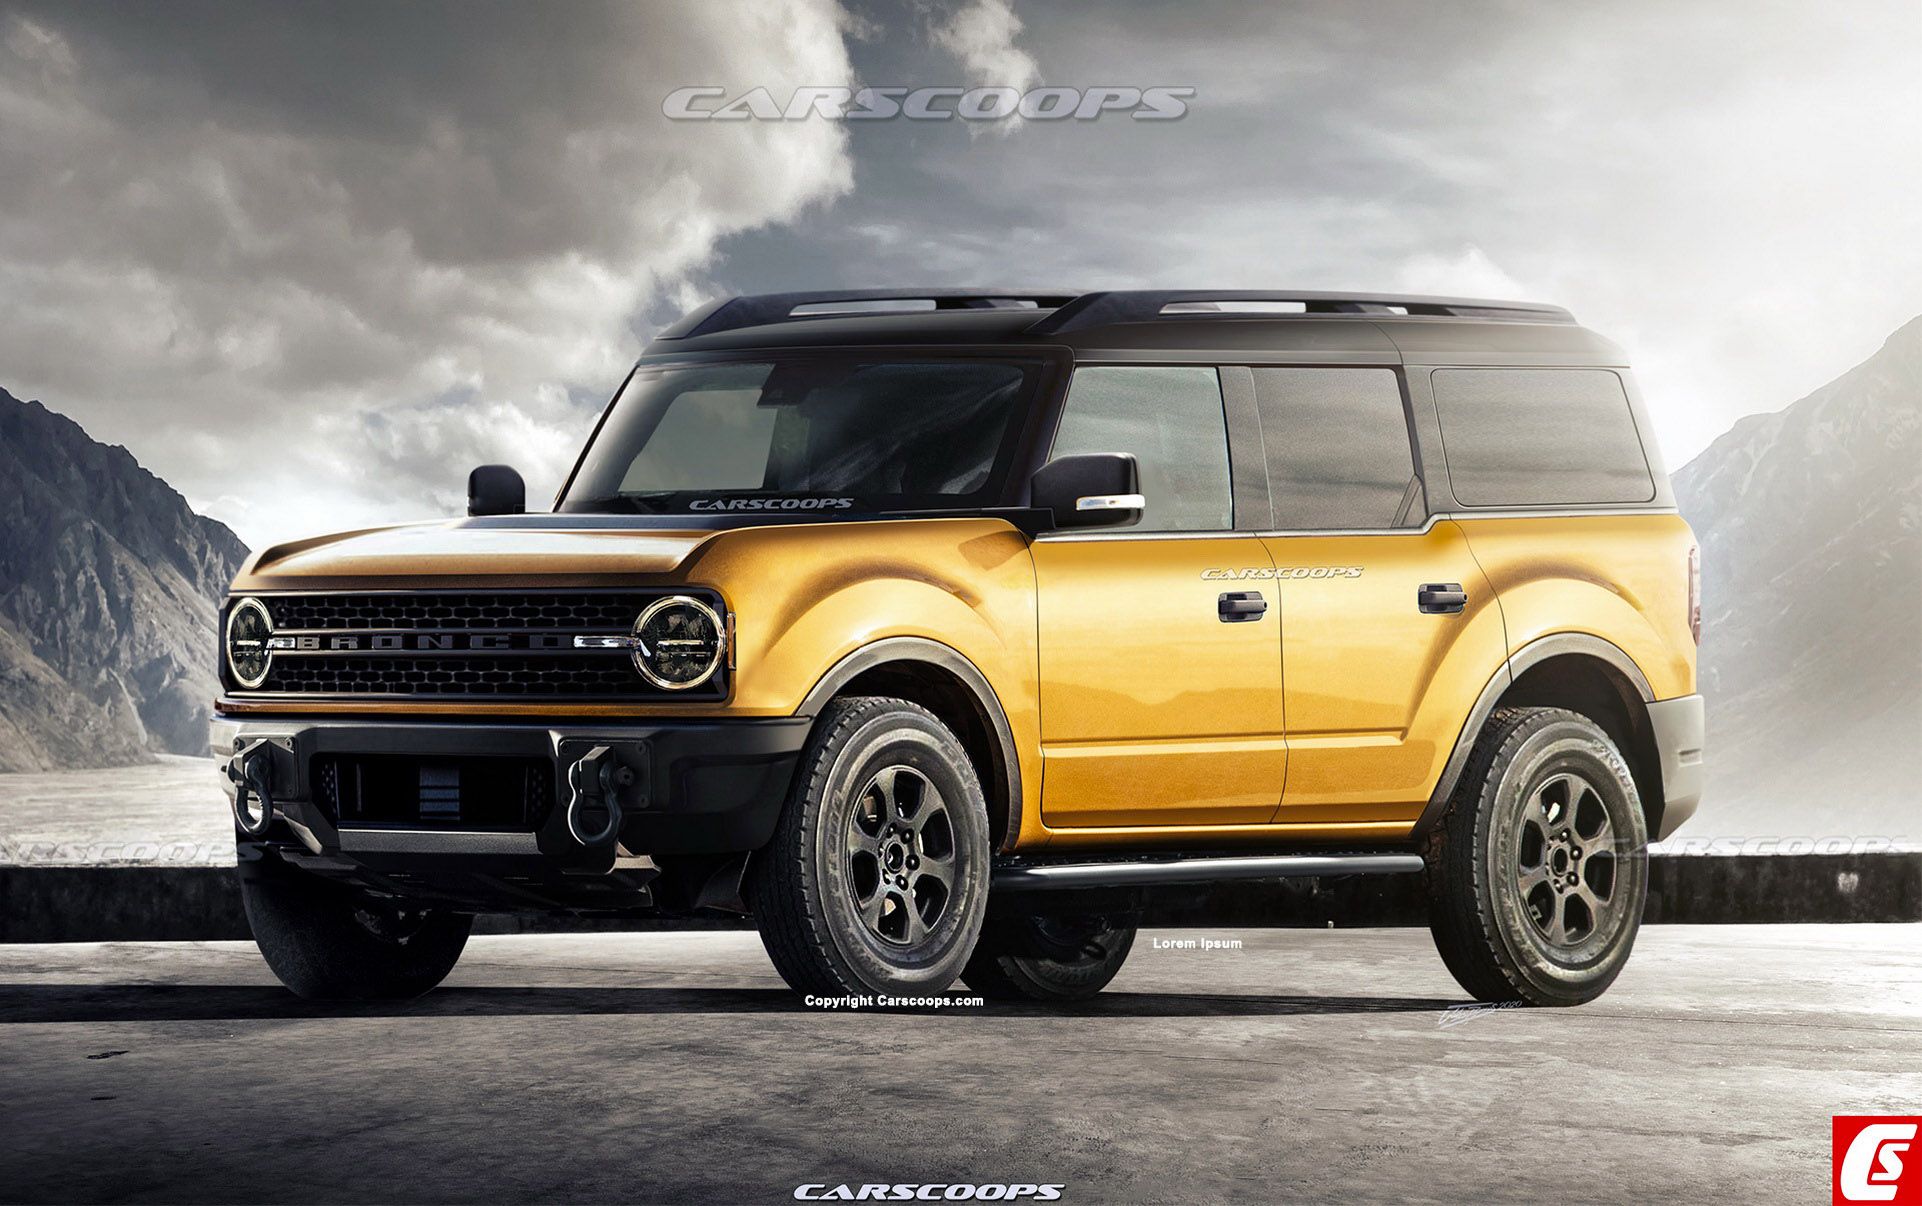 Ford Bronco: Design, Power And Everything Else We Know About